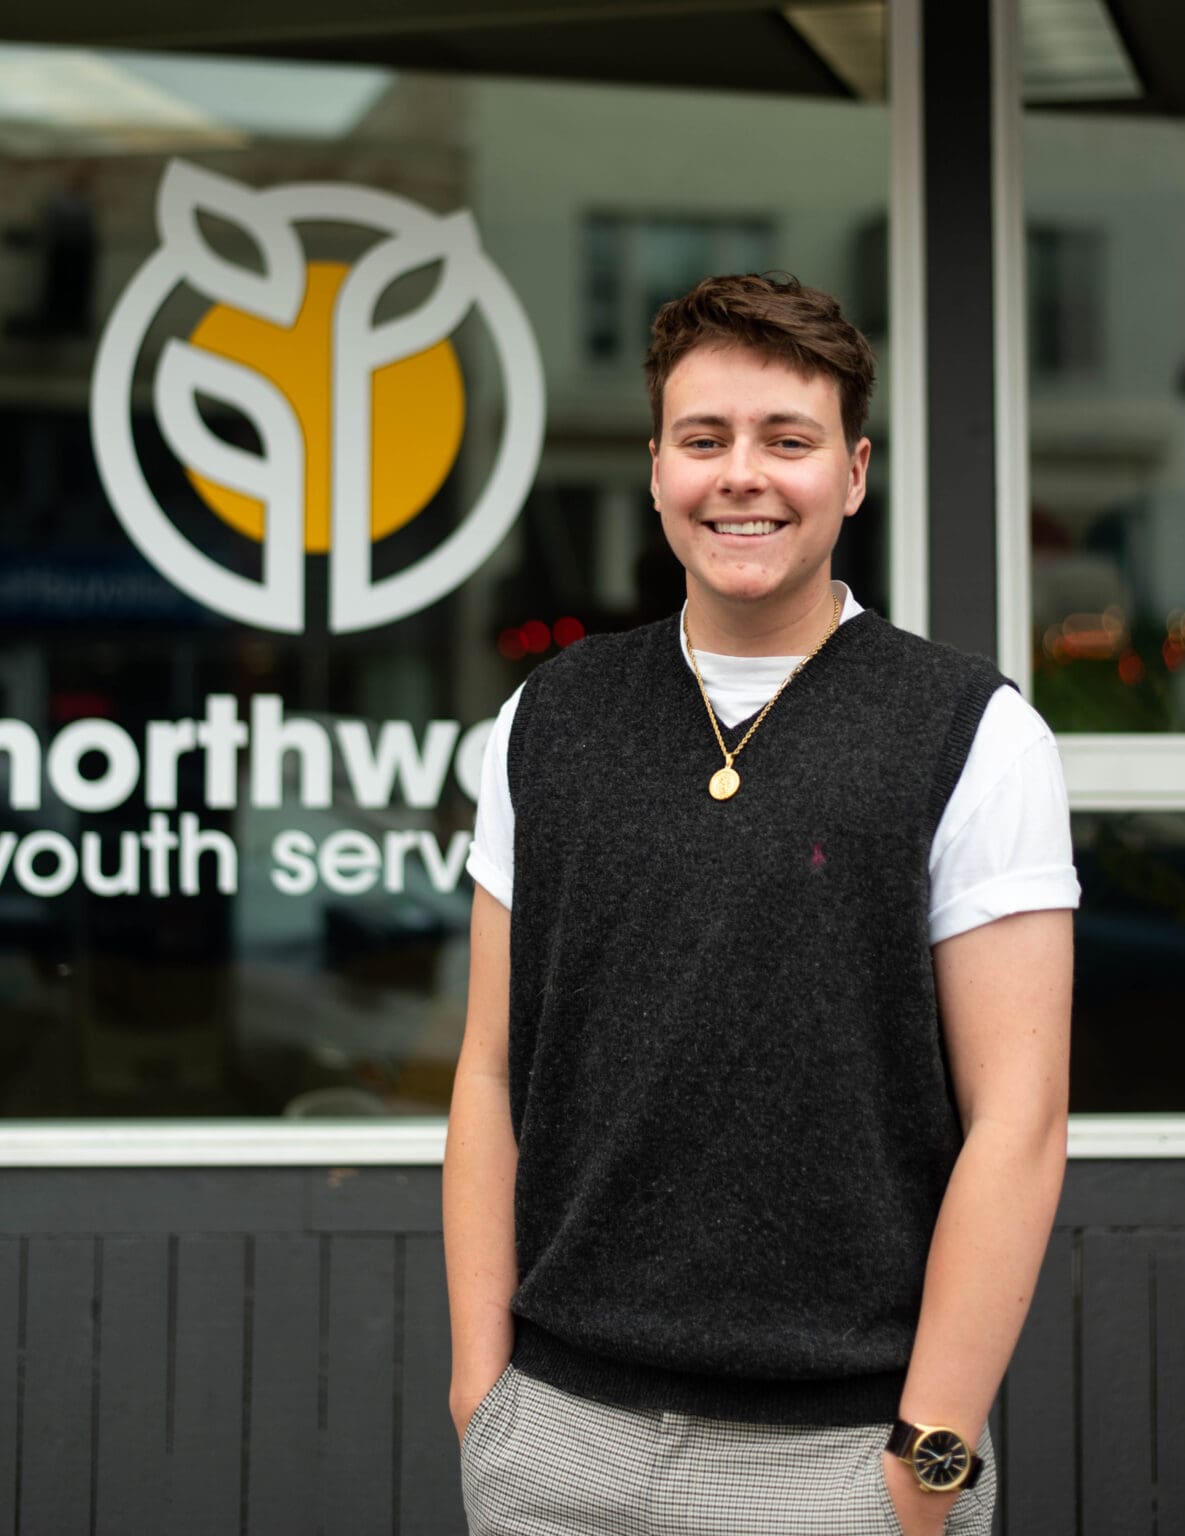 River Porter is creative manager for Northwest Youth Services in Bellingham. Porter said most people don't know he's very athletic. In high school